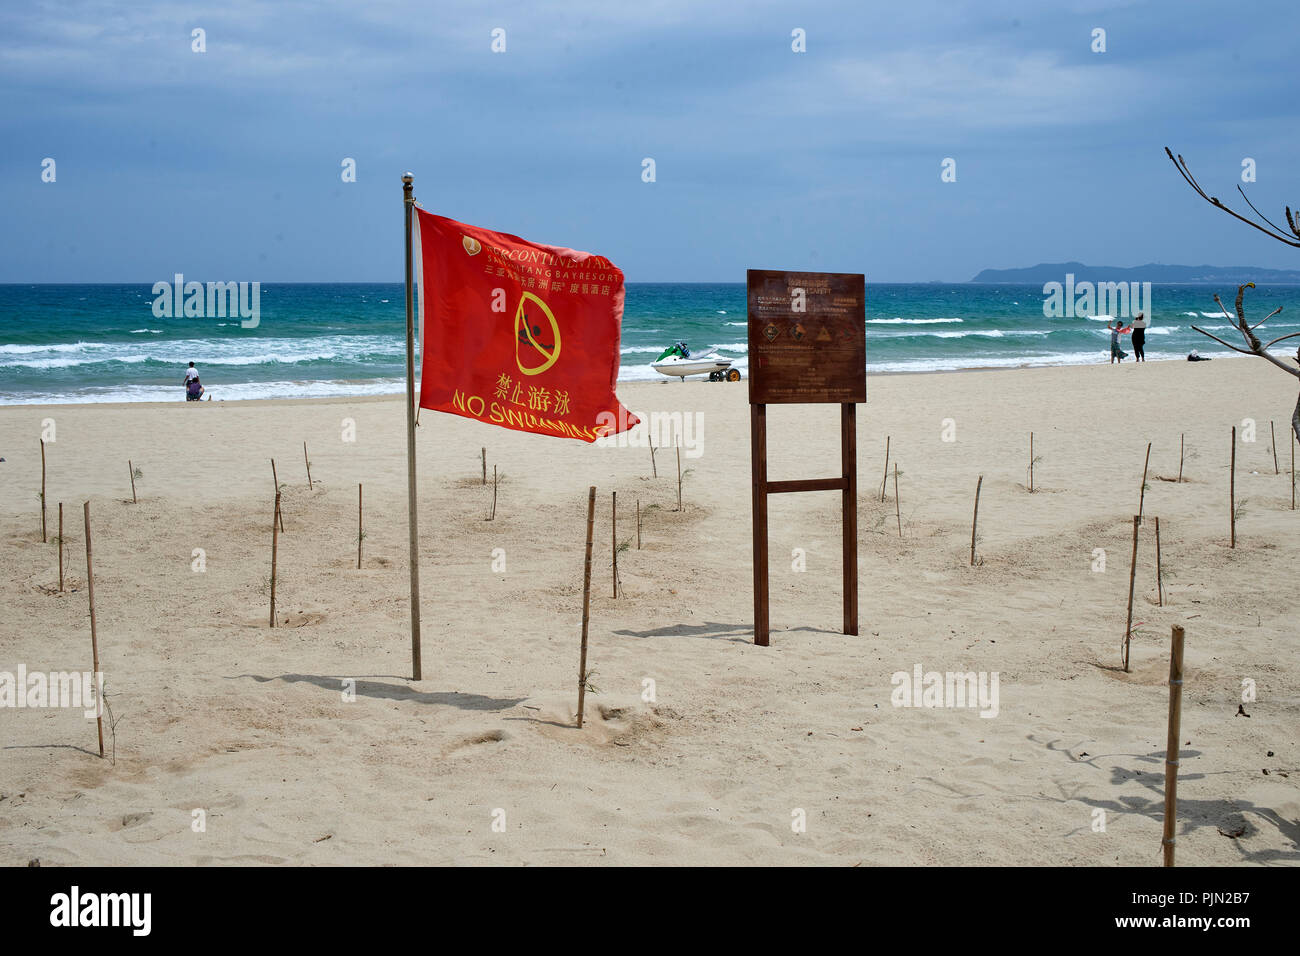 Sandy beach at the seaside, Sanya, on a windy summer day. 'No swimming' flags visible Stock Photo